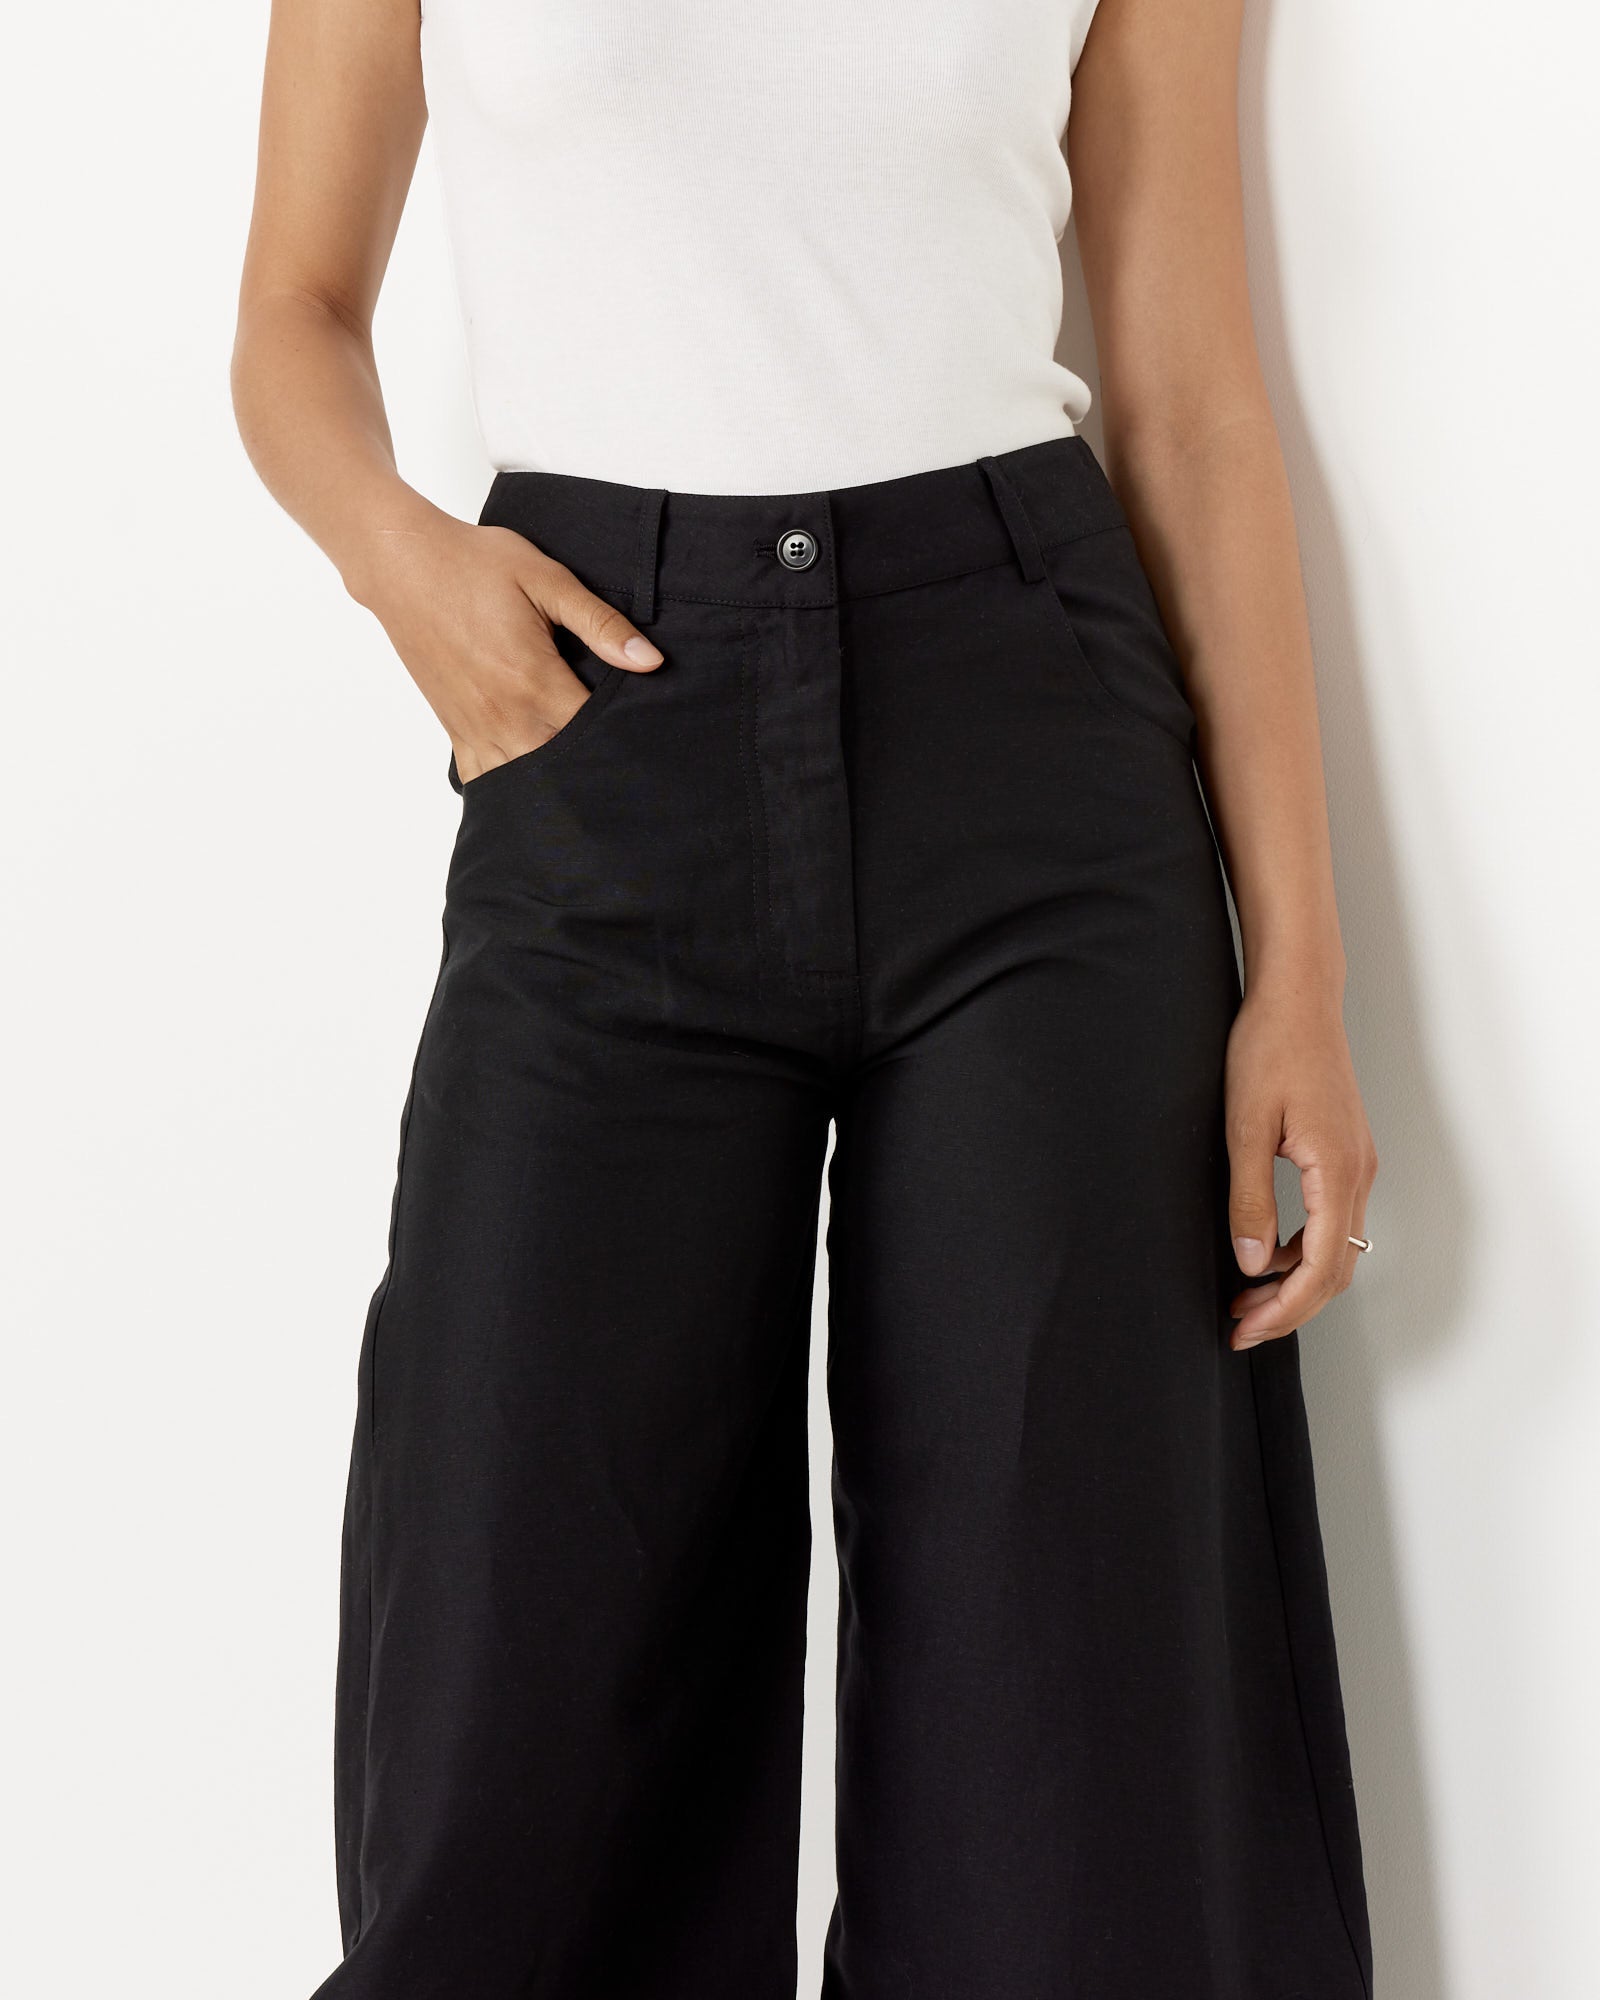 Pipette Pant in Black